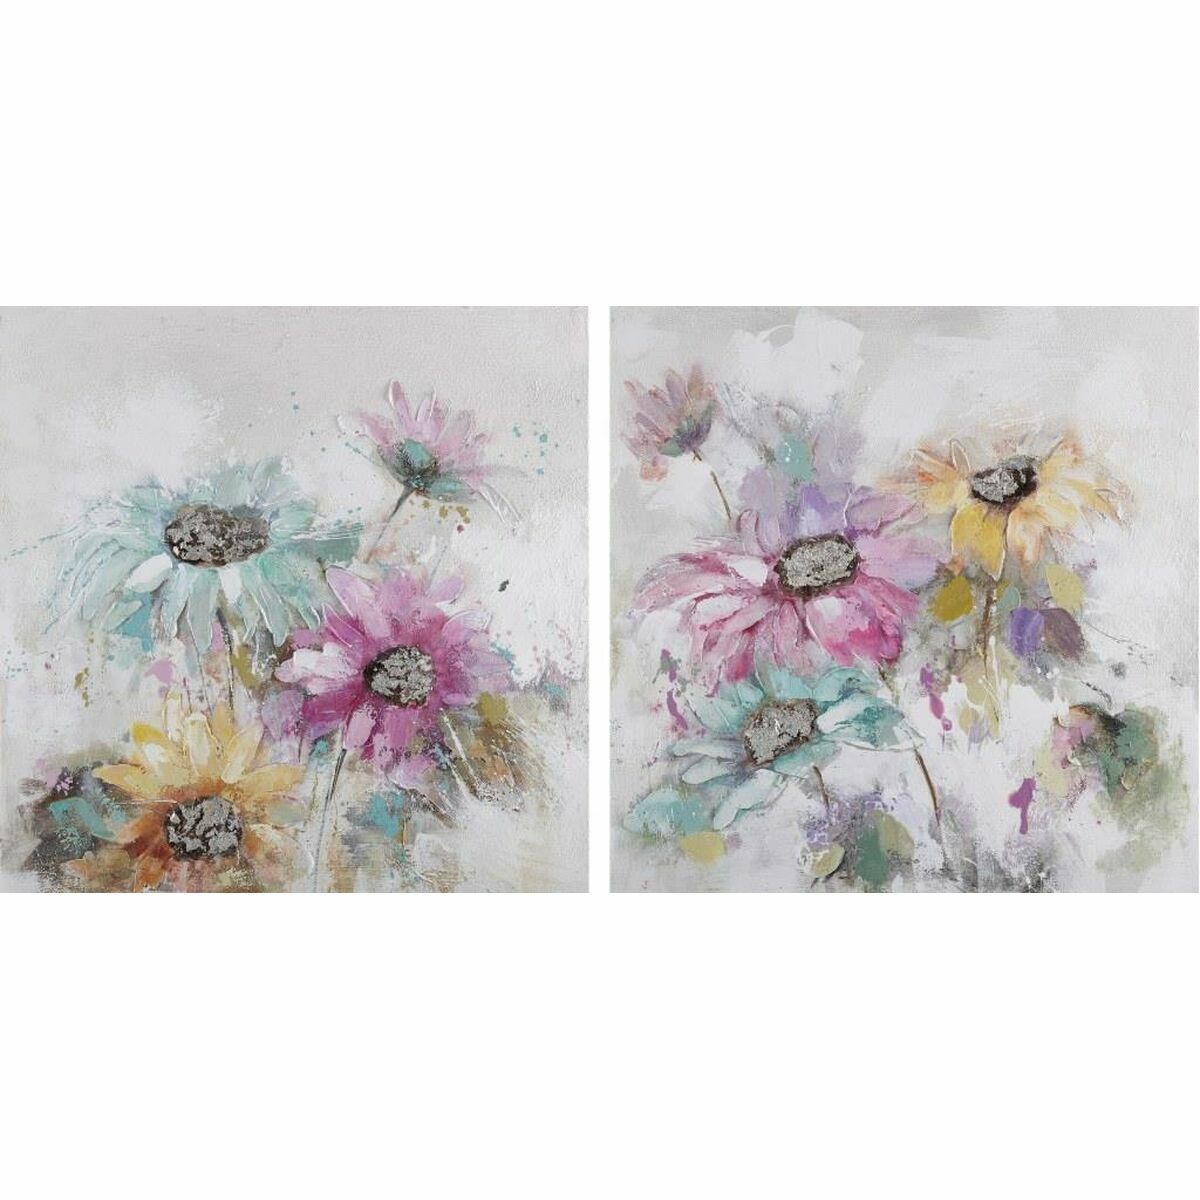 Painting DKD Home Decor 100 x 3,5 x 100 cm Flowers Shabby Chic (2 Units)